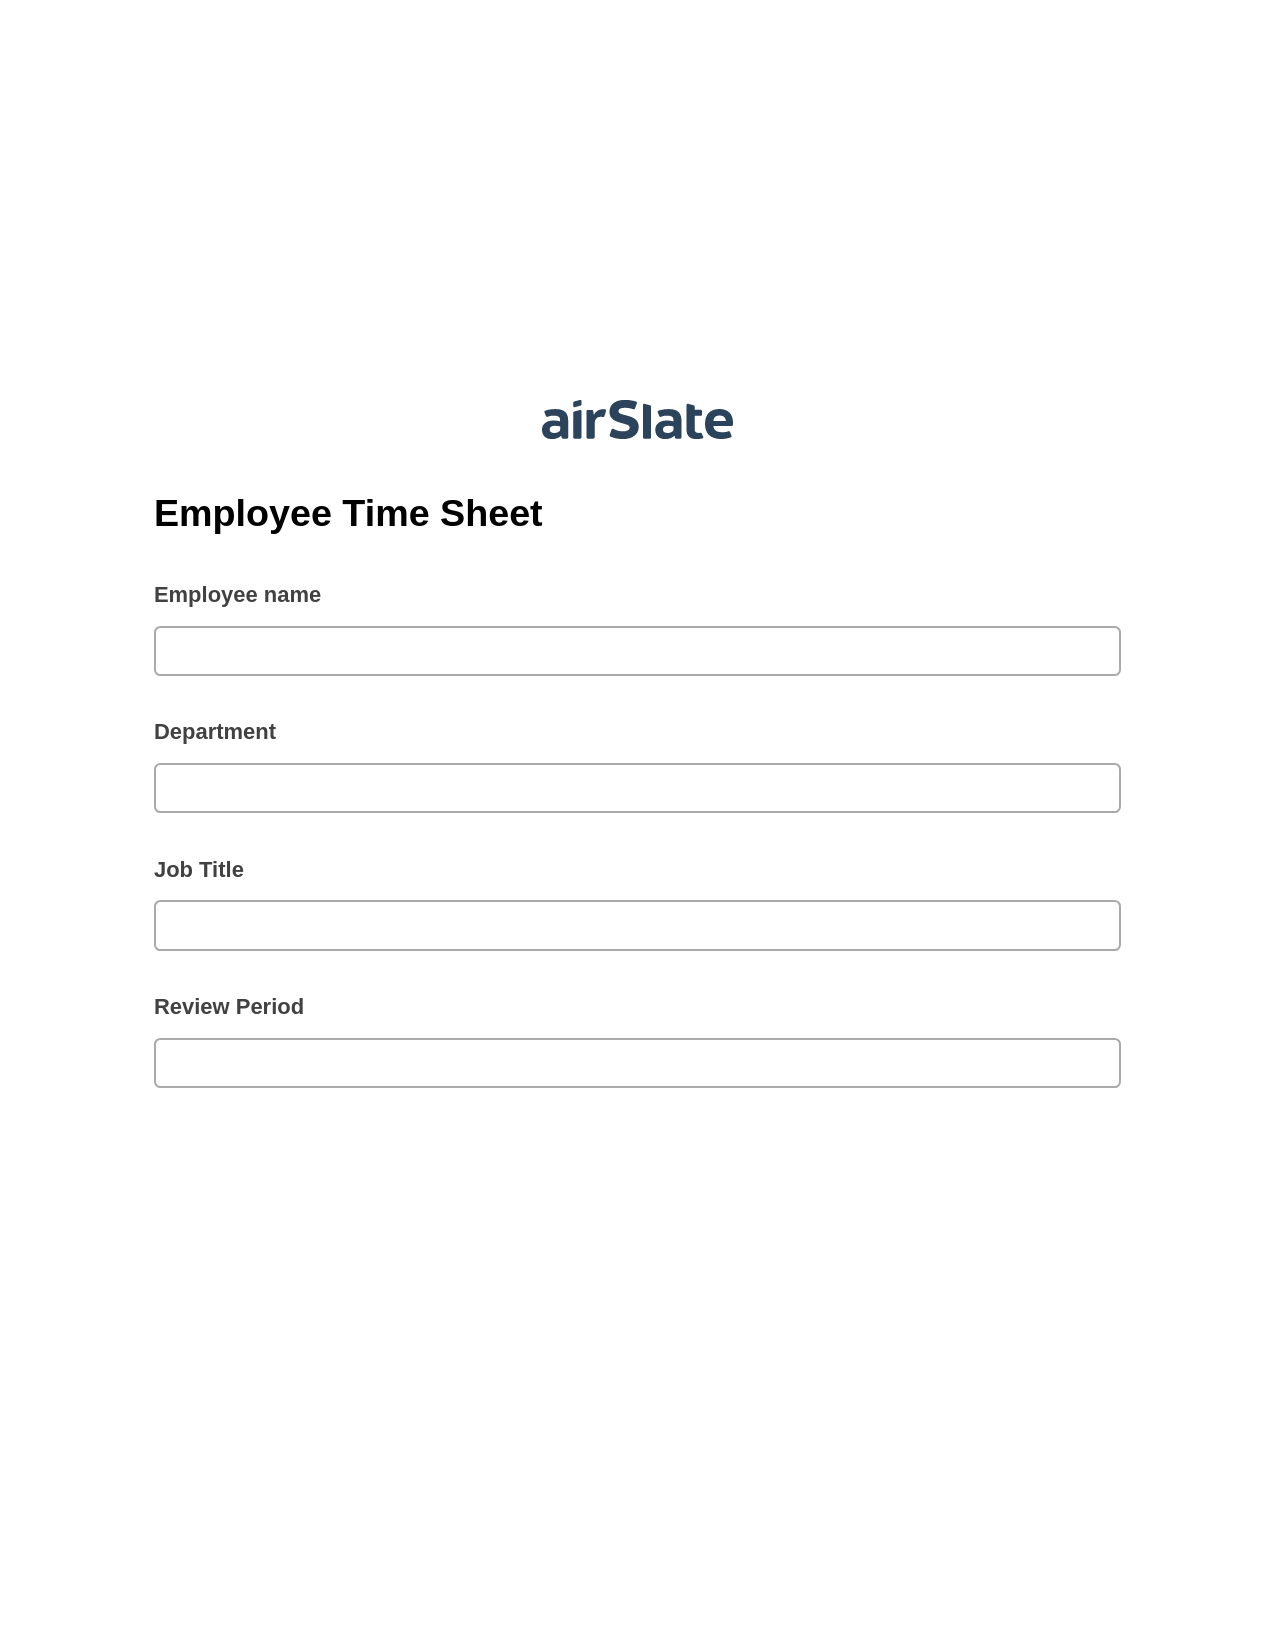 Employee Time Sheet Pre-fill from Salesforce Records Bot, Create Salesforce Records Bot, Webhook Postfinish Bot